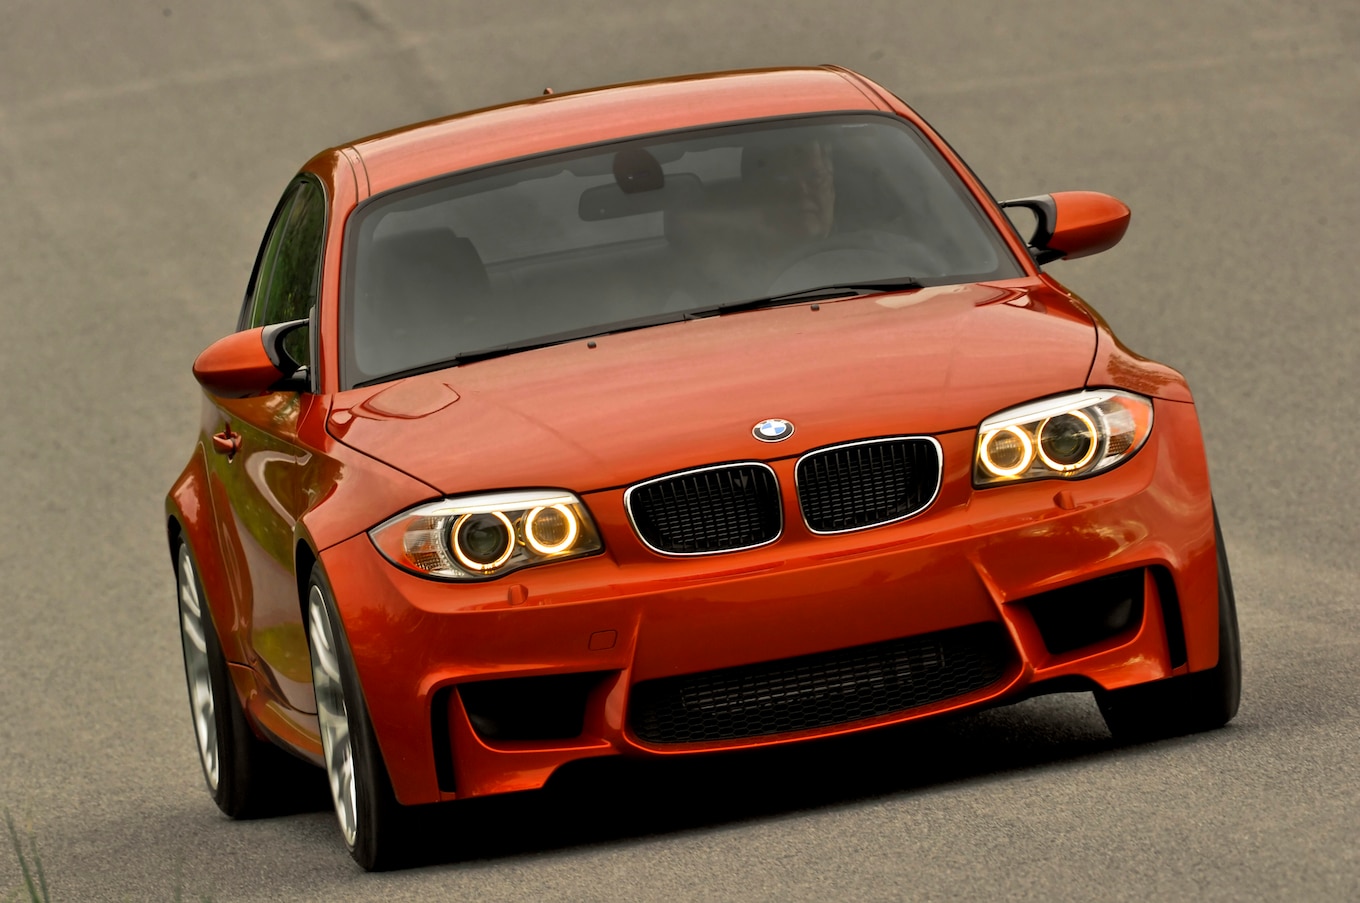 2013 bmw 135i convertible review